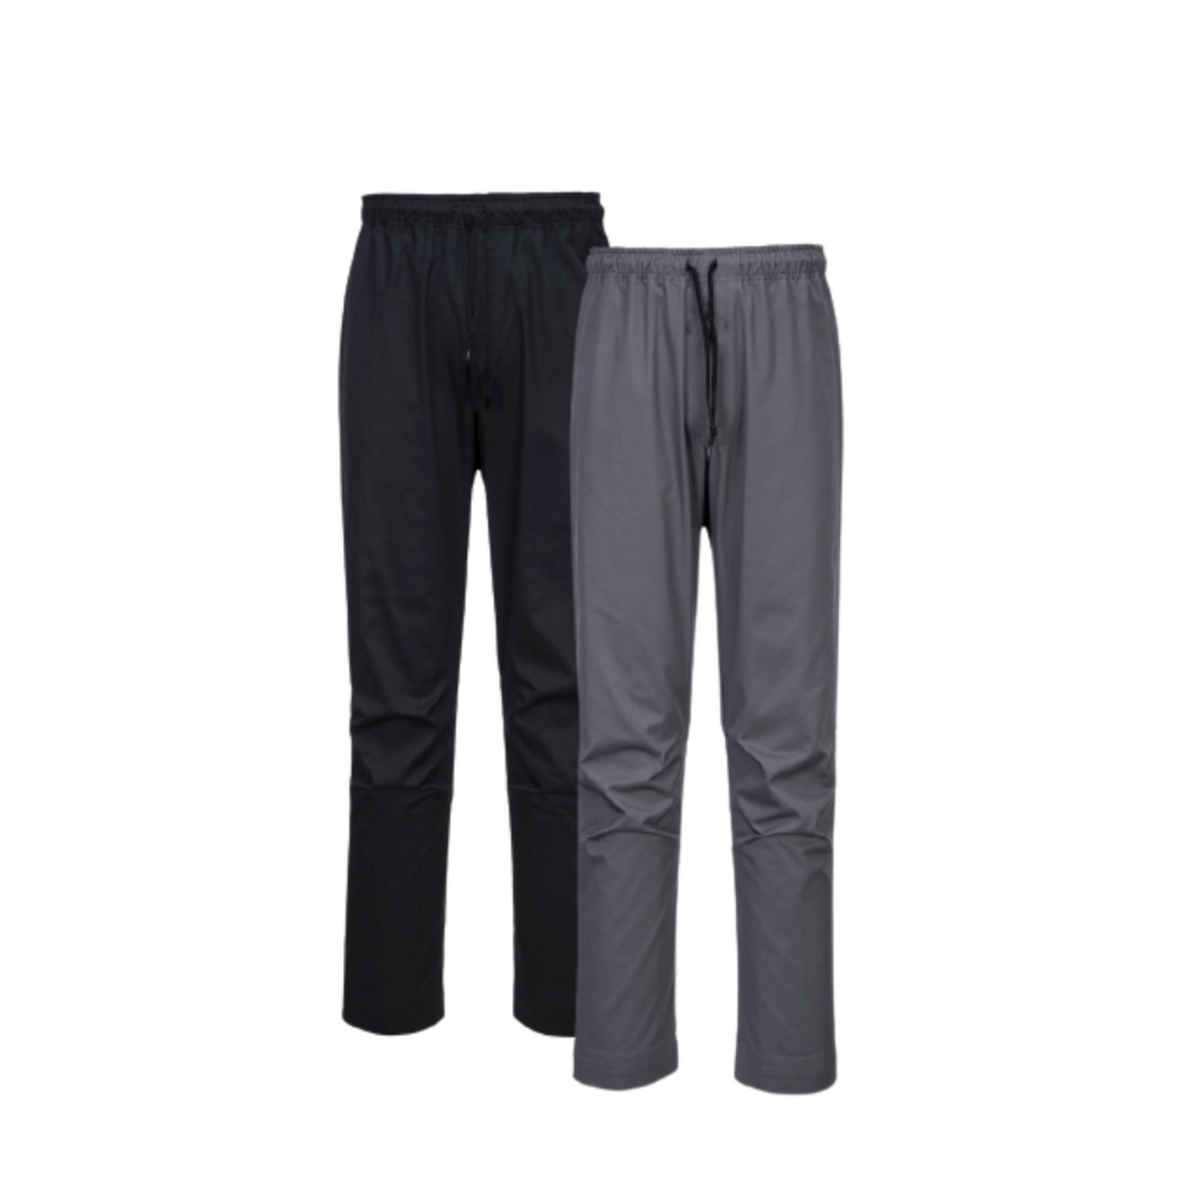 Portwest MeshAir Pro Pants Drawstring Waistband Lightweight Chef Pant C073-Collins Clothing Co